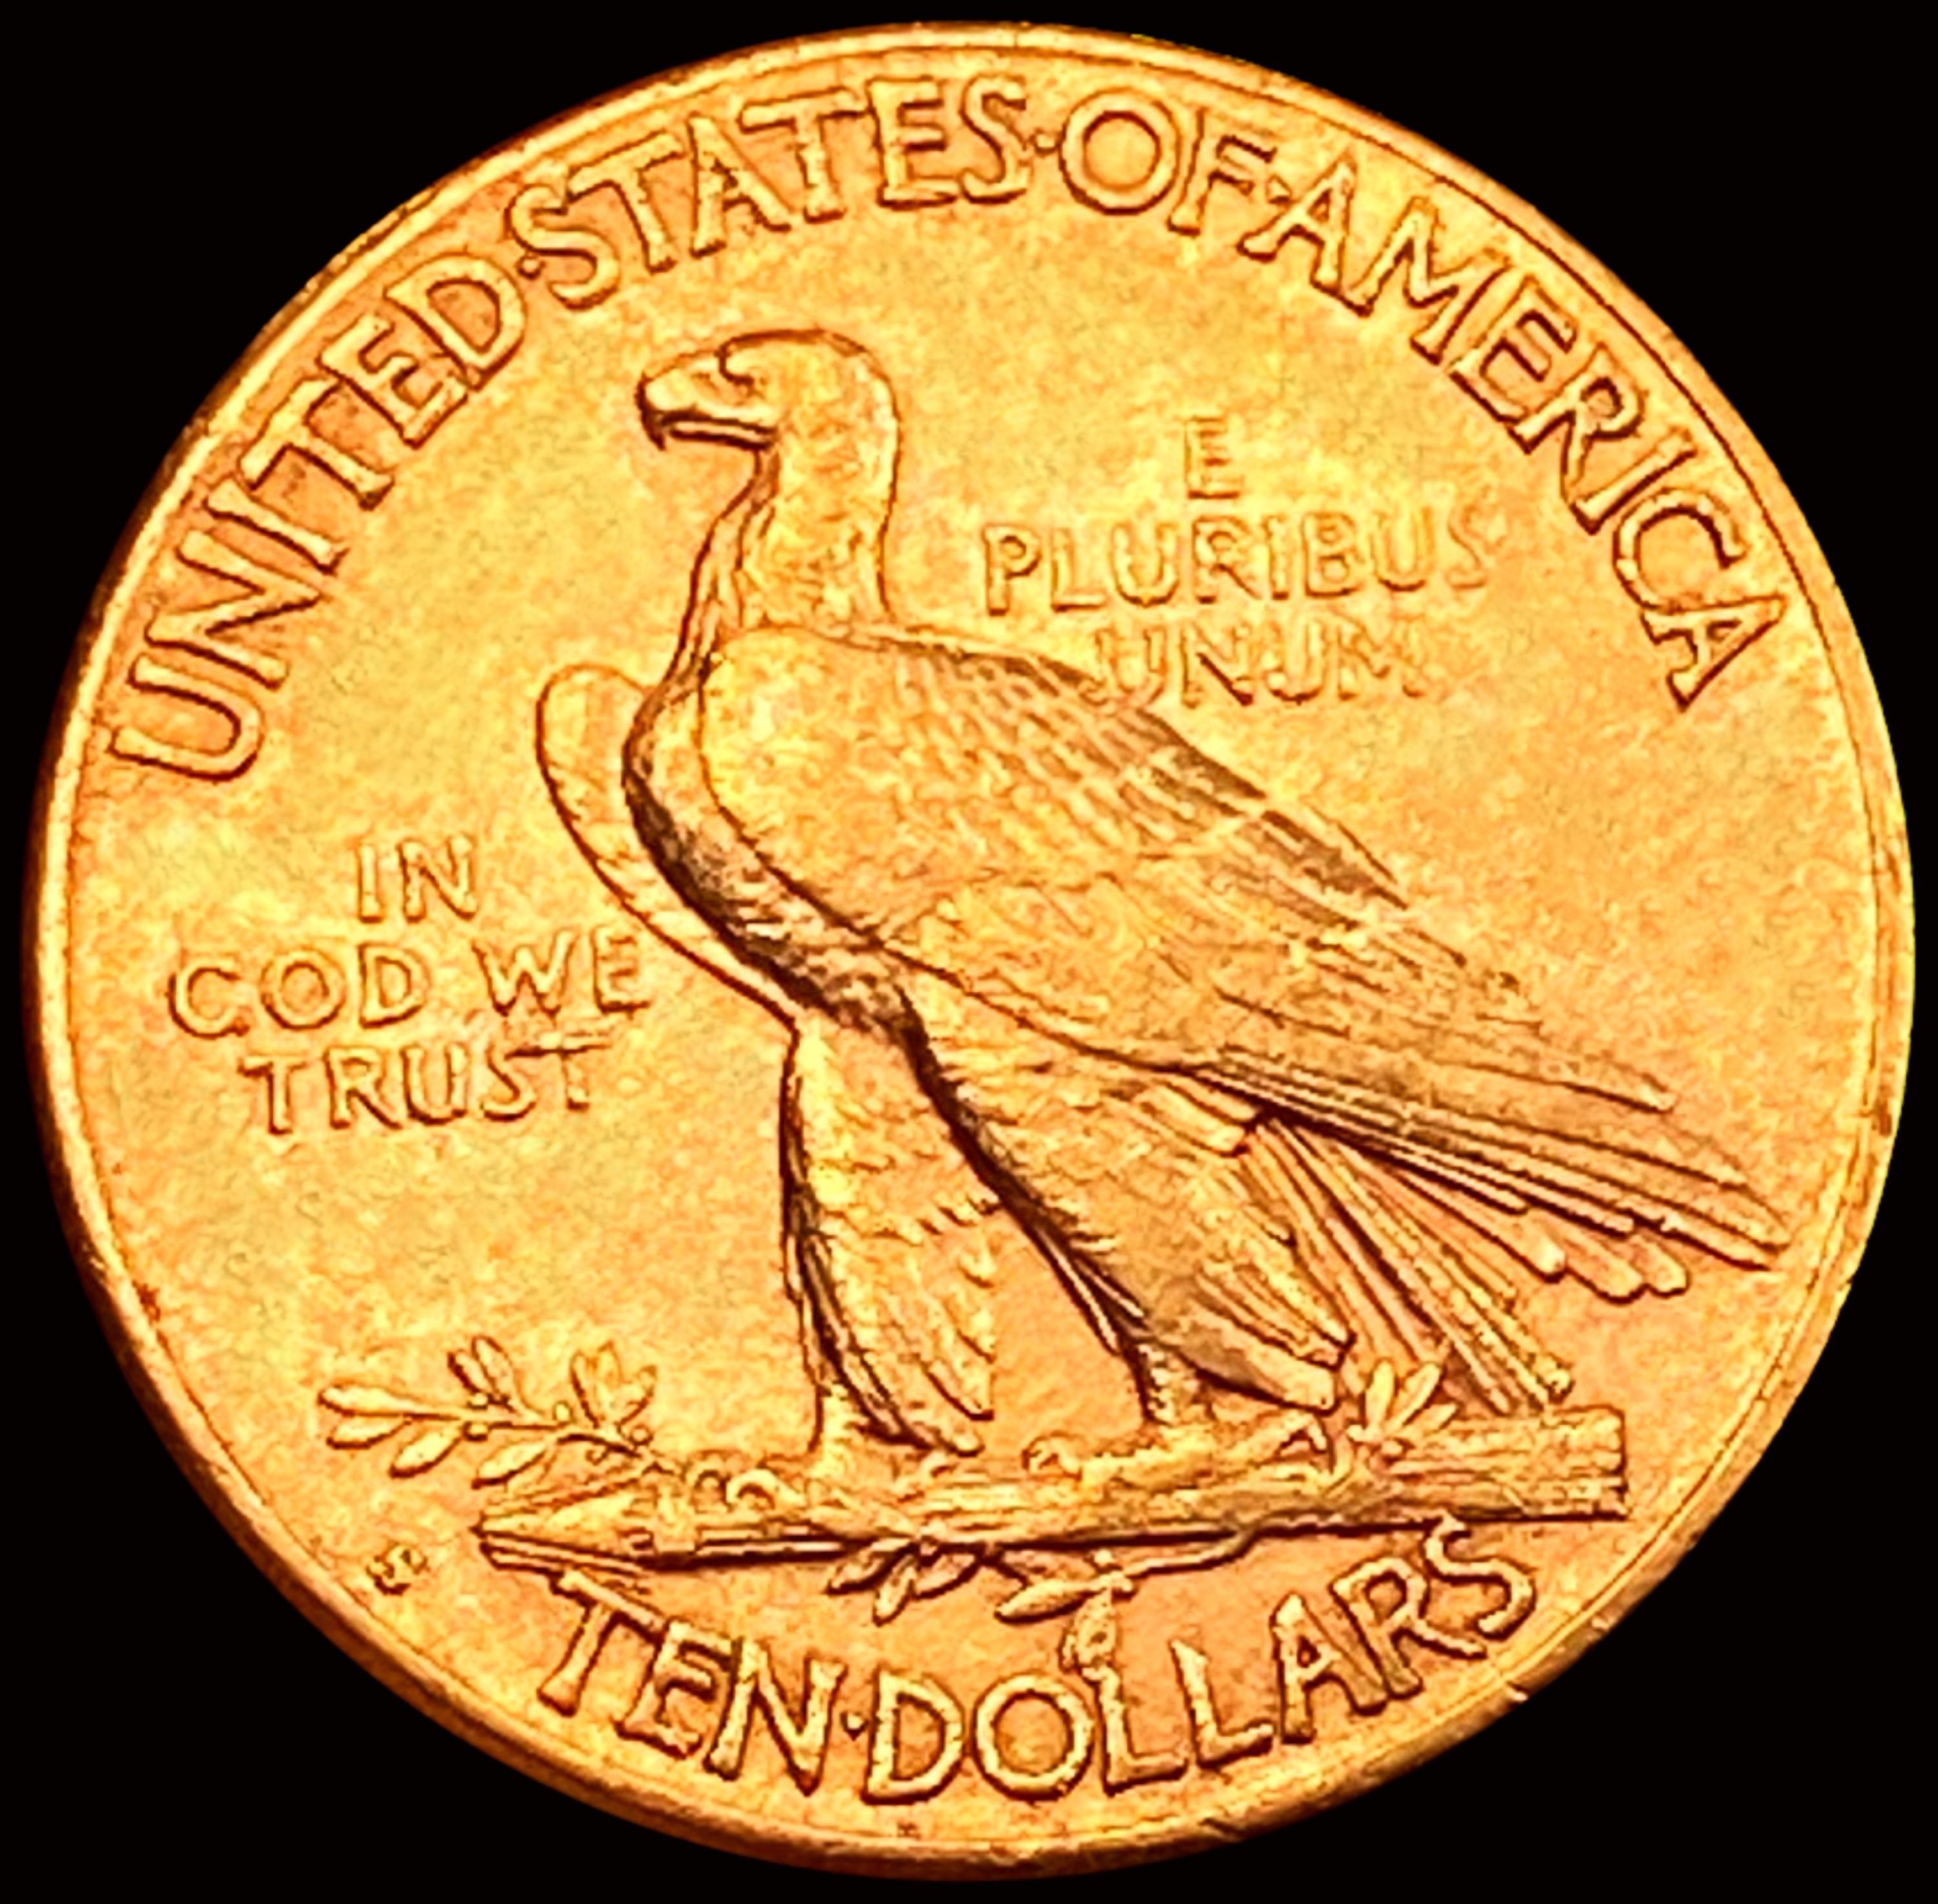 1909-S $10 Gold Eagle UNCIRCULATED